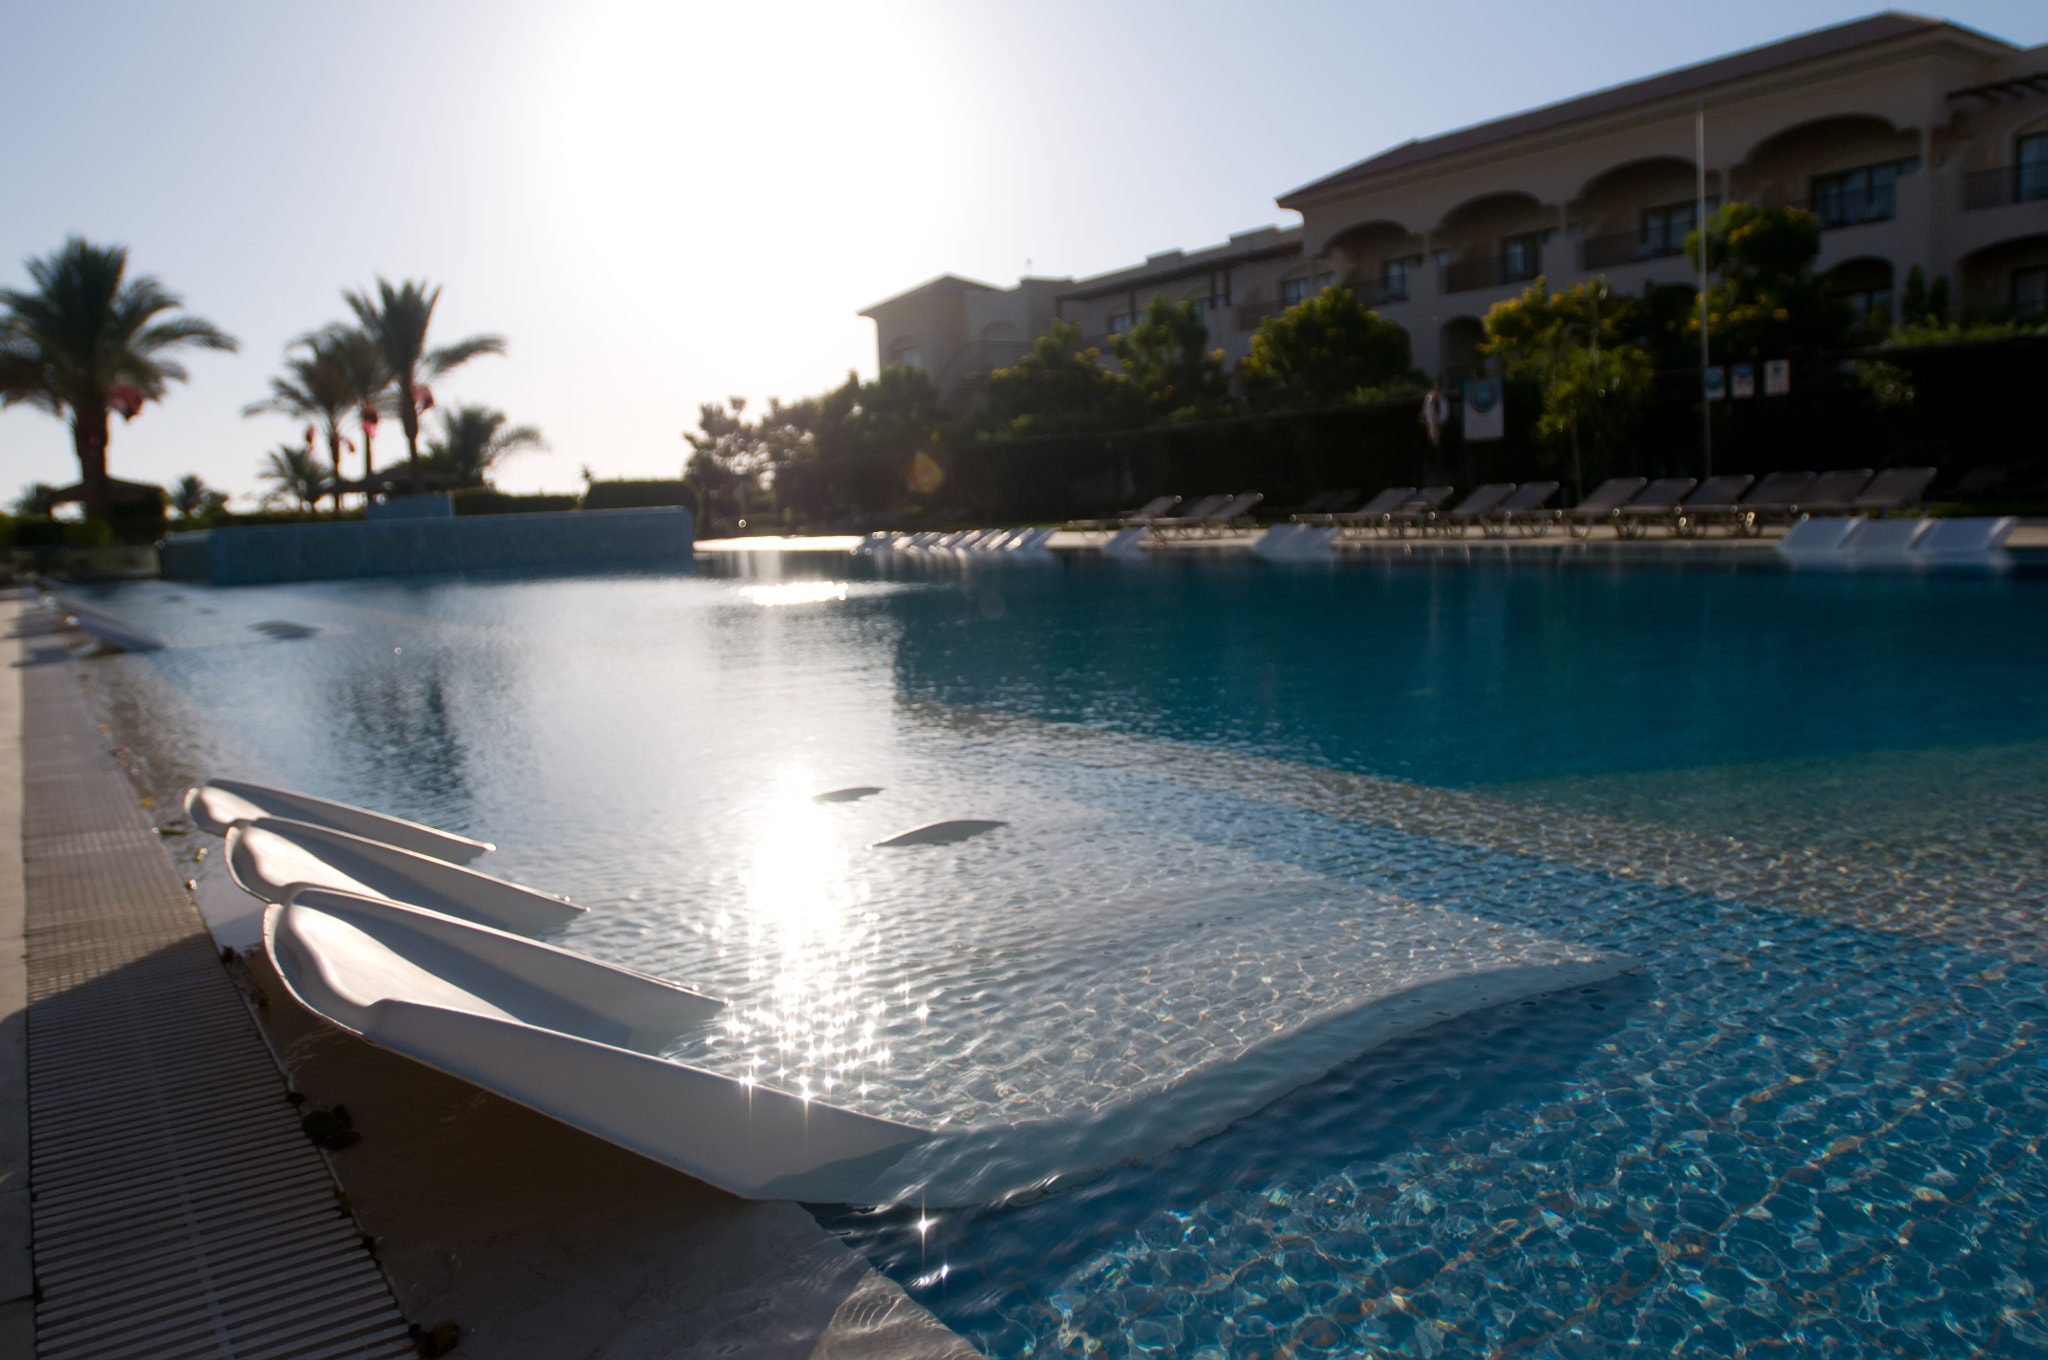 Nikon D300 sample photo. Blue pool at dawn with sunbeds near it photography